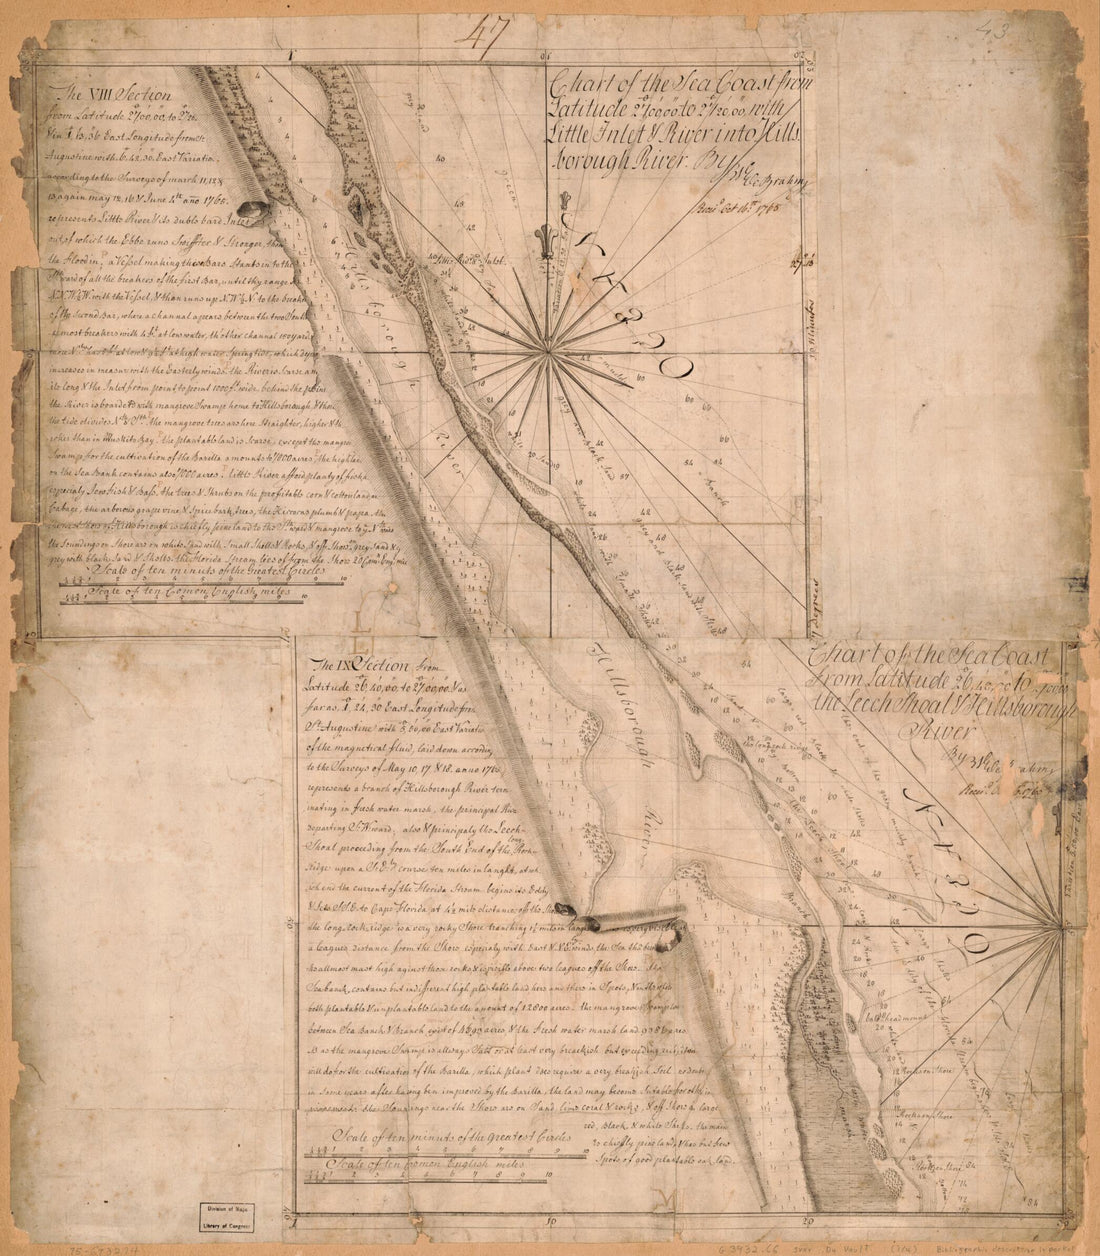 This old map of Charts of the Coast of Florida from 1765 was created by John Gerar William De Brahm in 1765